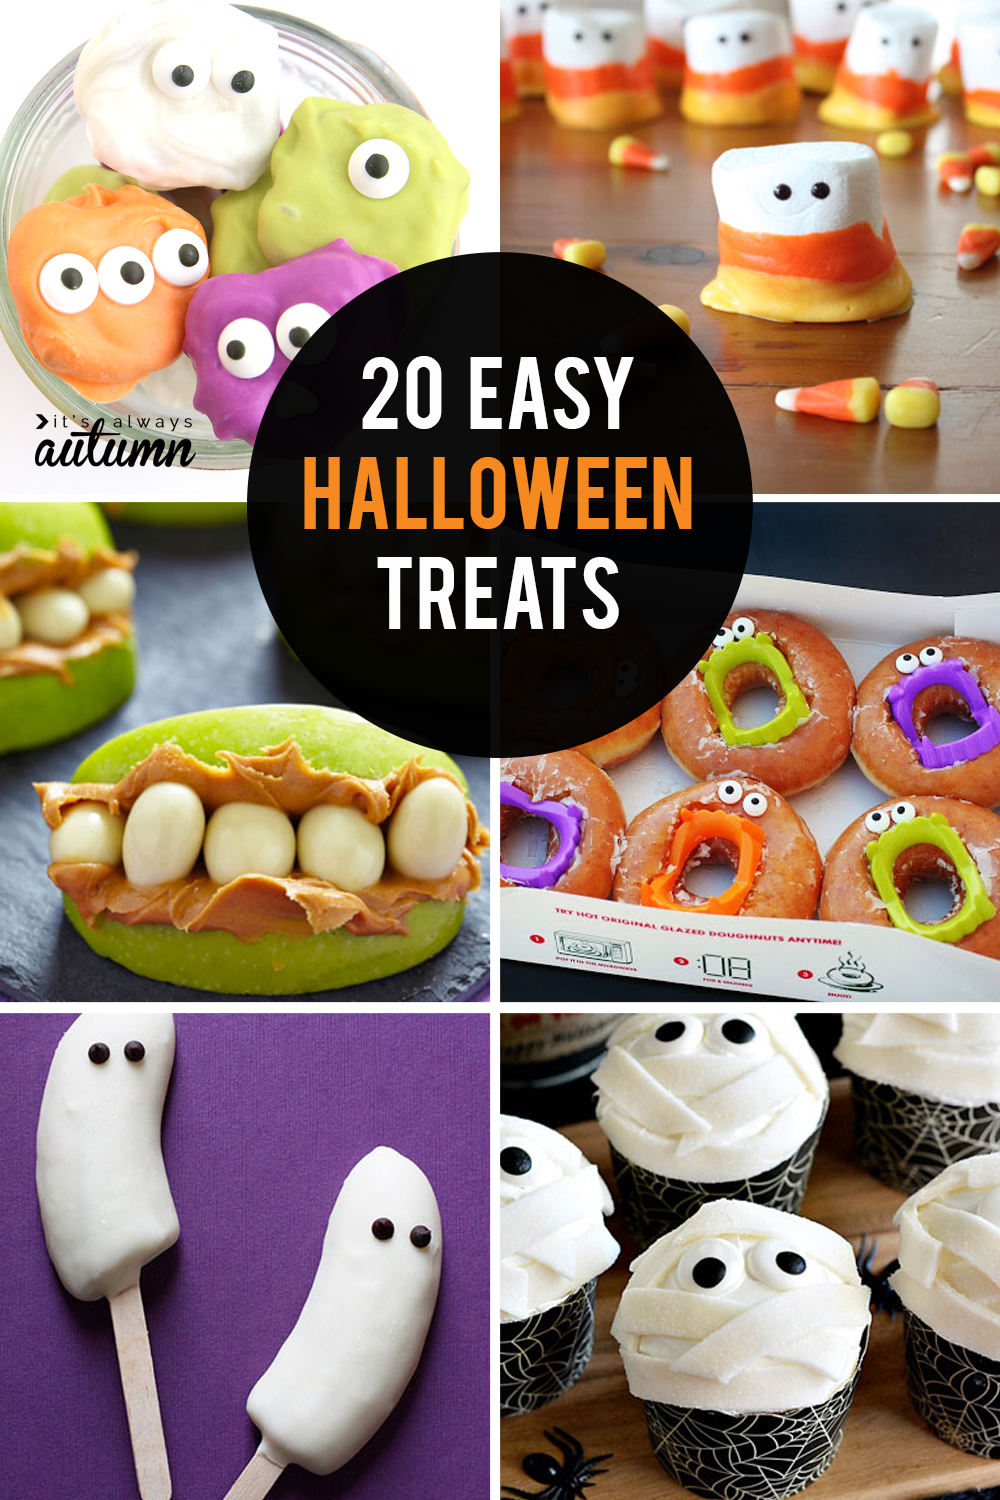 20 fun + easy Halloween treats to make with your kids - It's Always Autumn